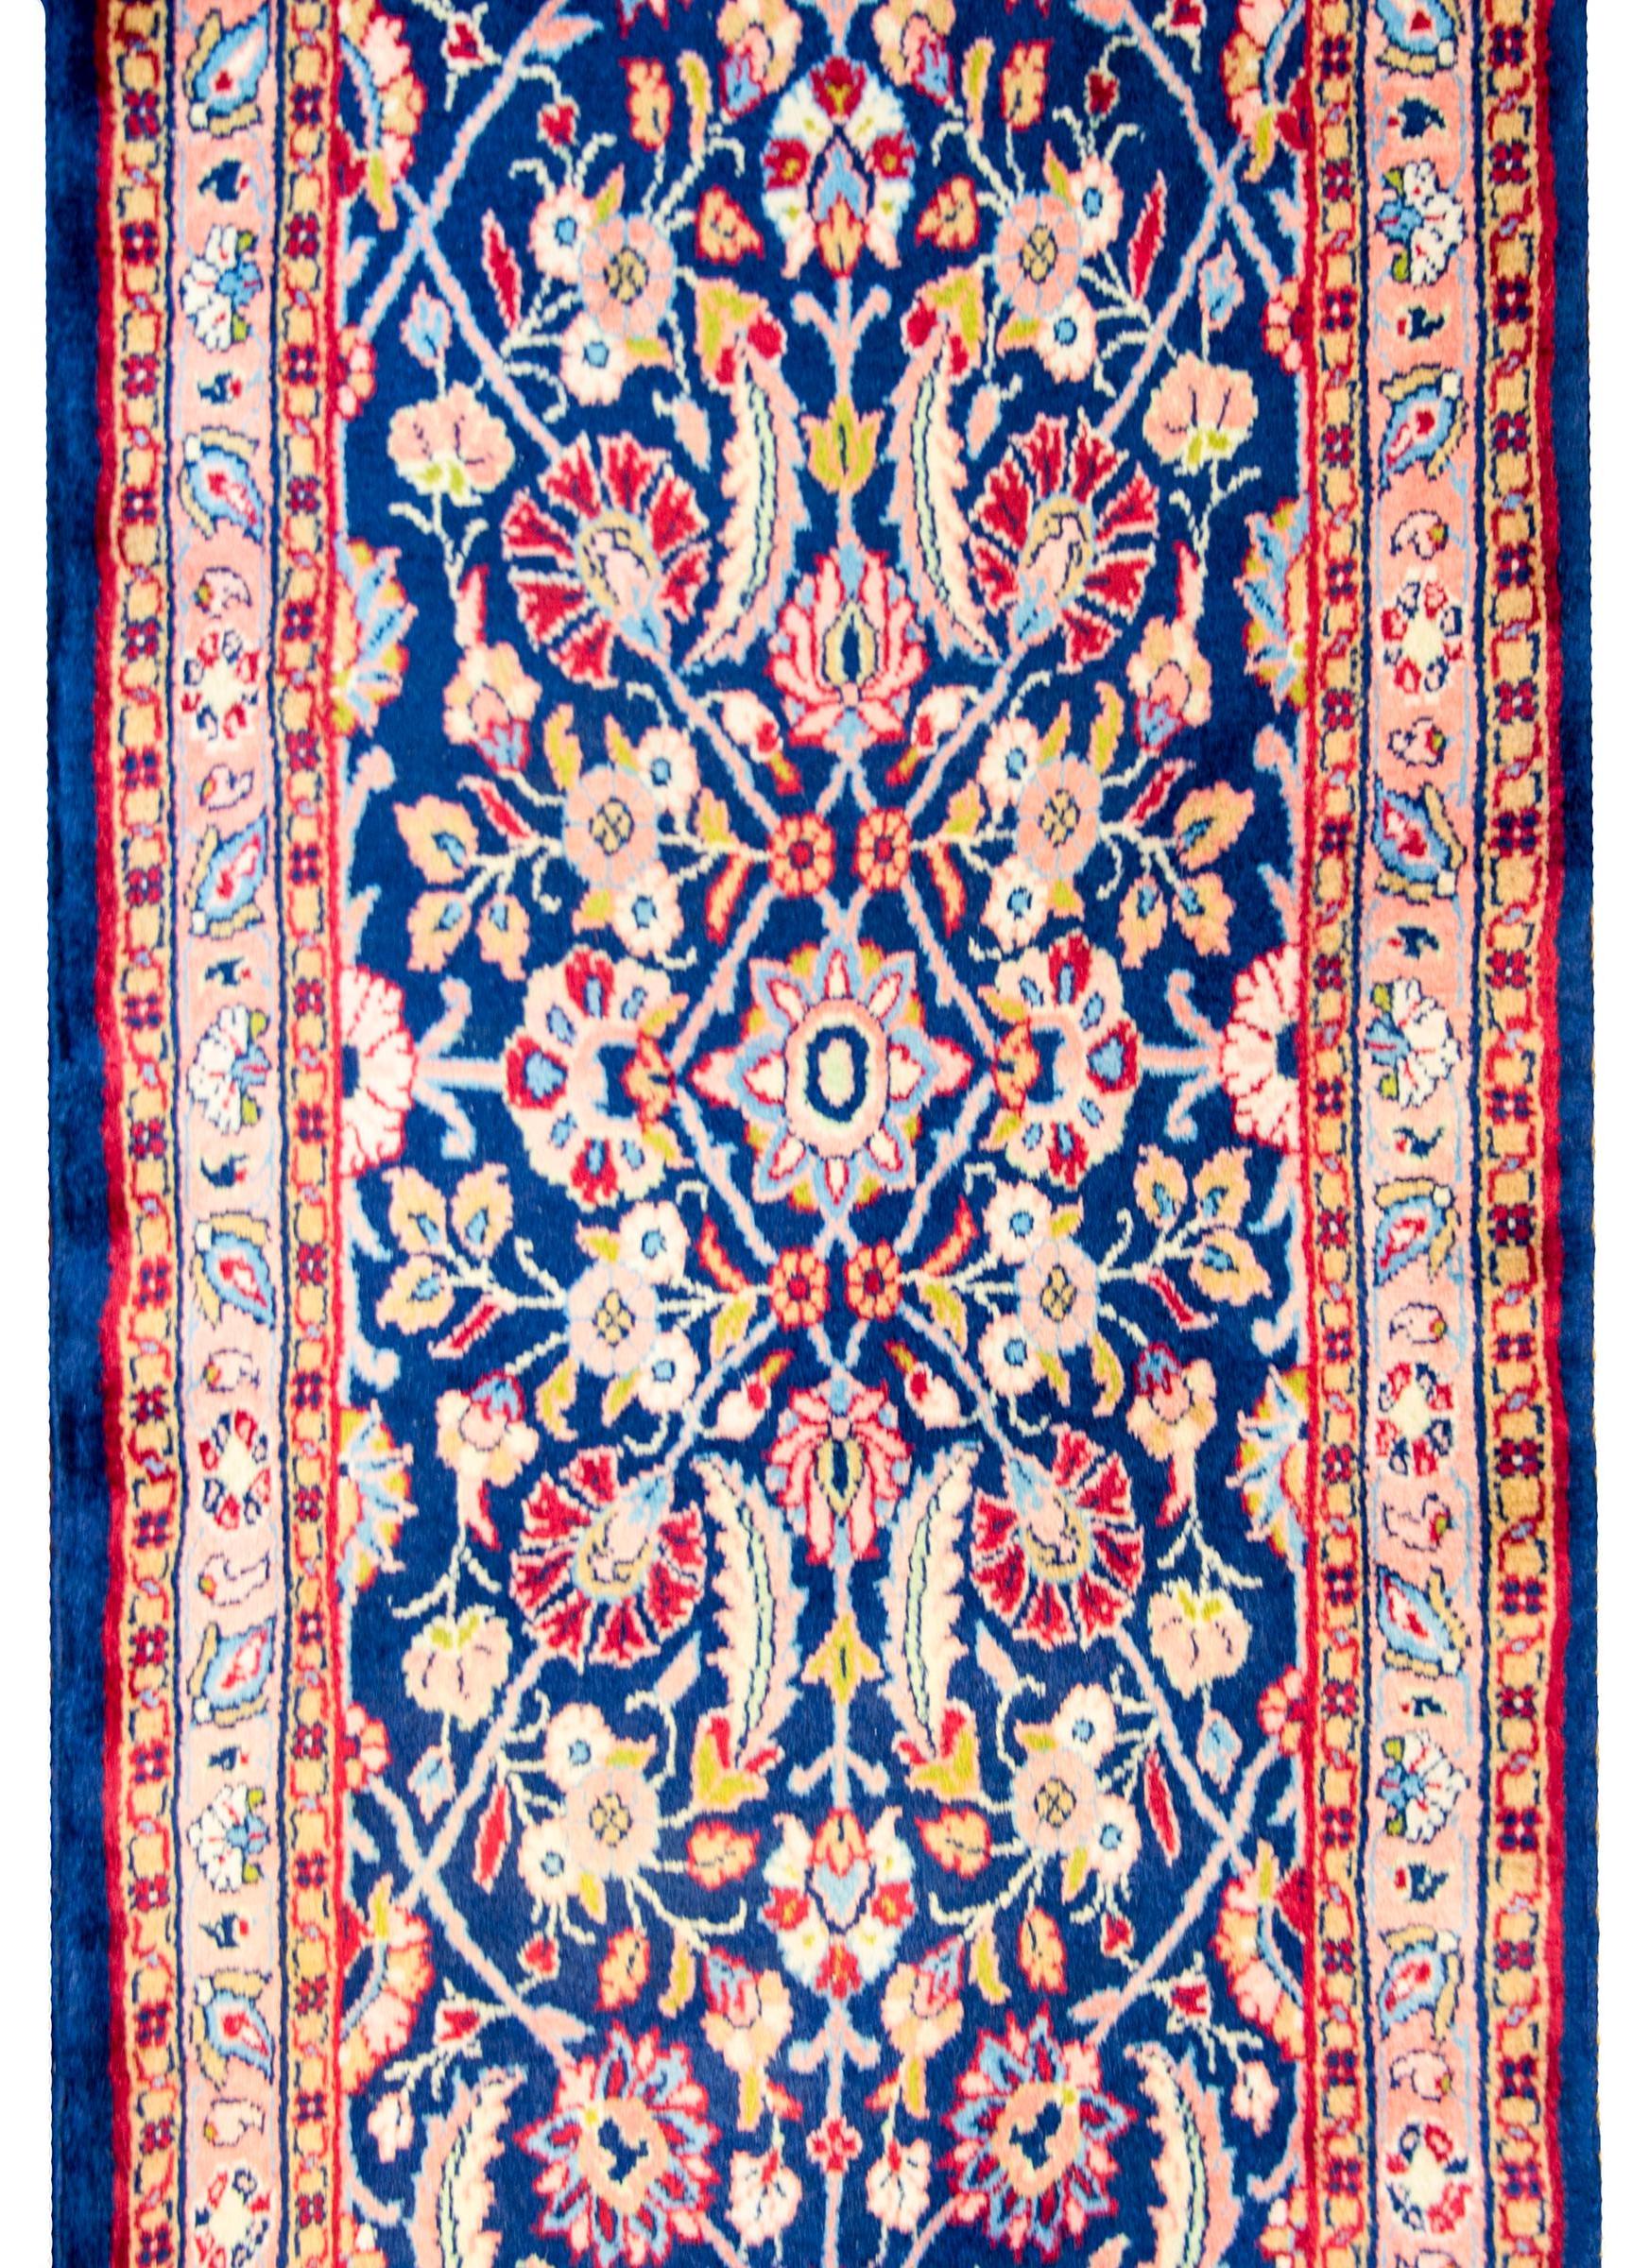 A beautiful late 20th century Persian lilihan runner with three floral medallions amidst a field of myriad flowers and scrolling vines woven in light indigo, pink, green, gold, cream, and dark cranberry, all on a dark indigo field. The border is